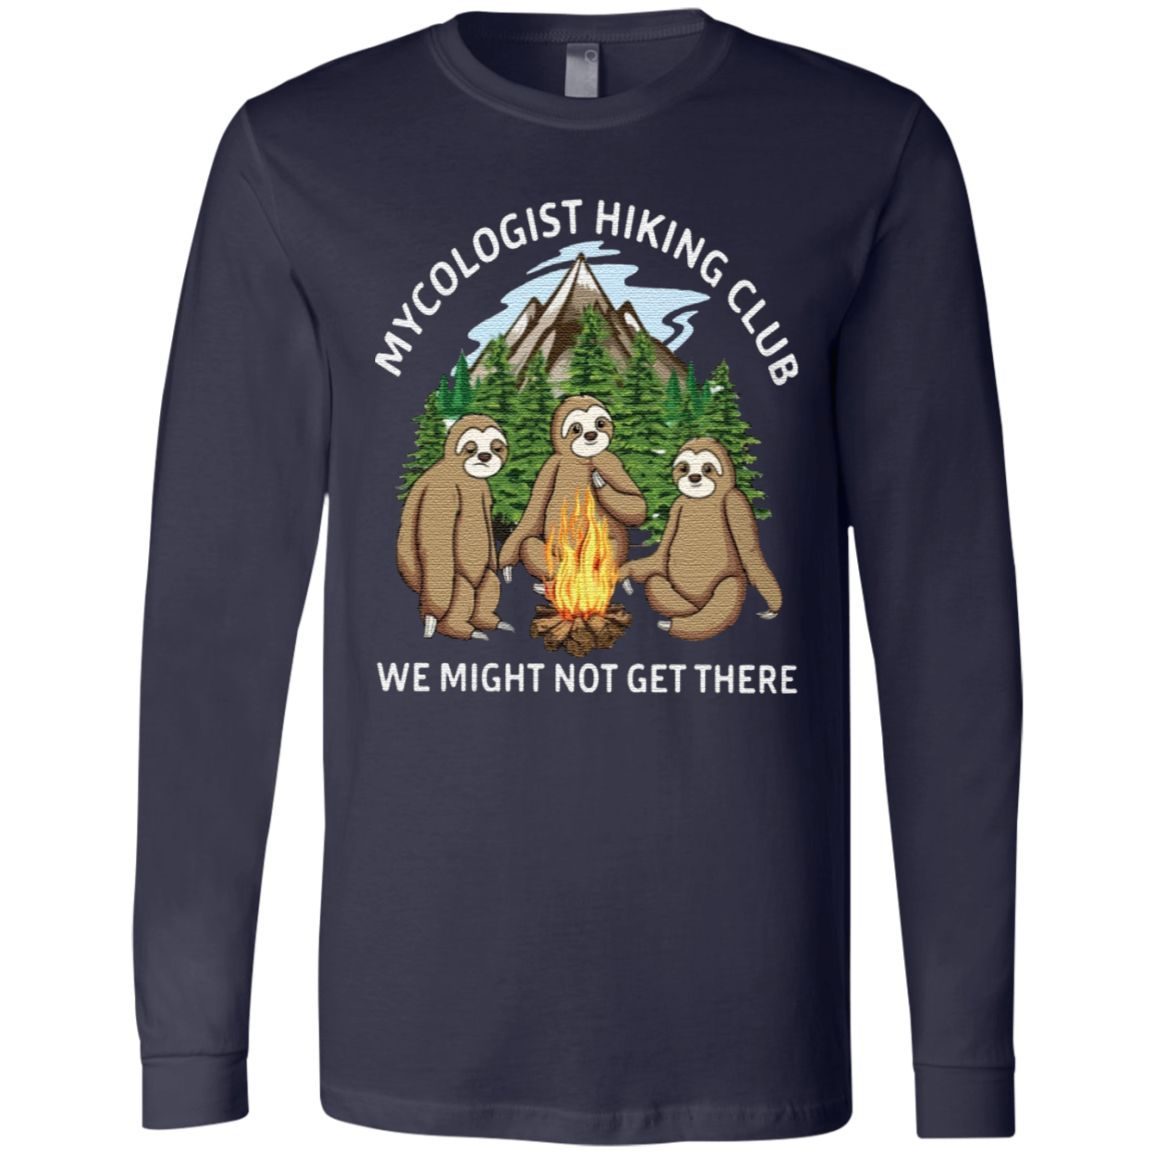 Mycologist Hiking Club We Might Not Get There T Shirt